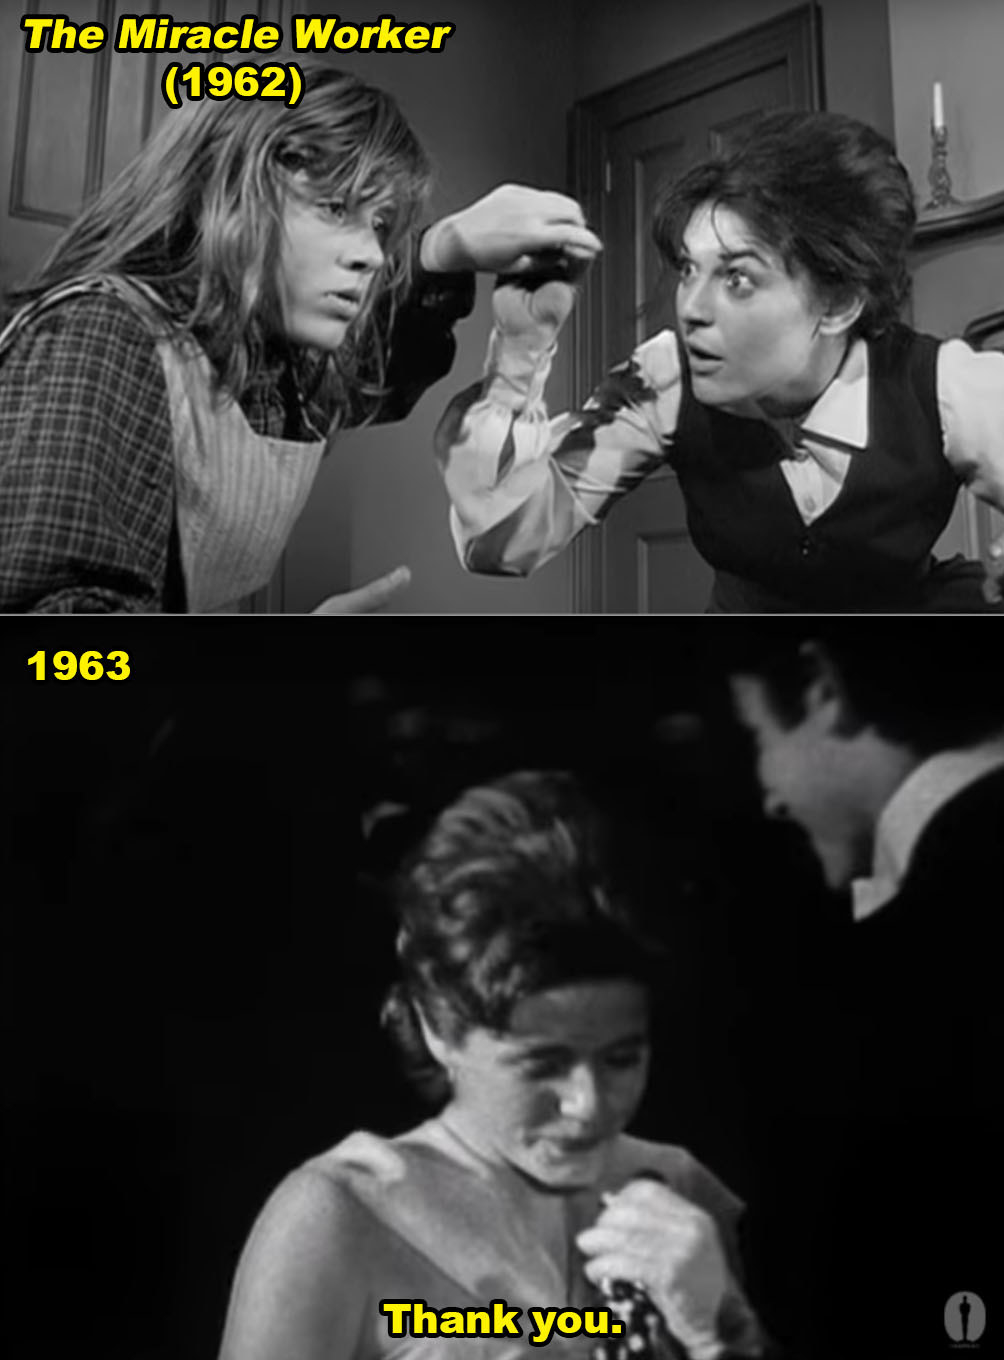 Patty in &quot;The Miracle Worker&quot; vs. her accepting her Oscar